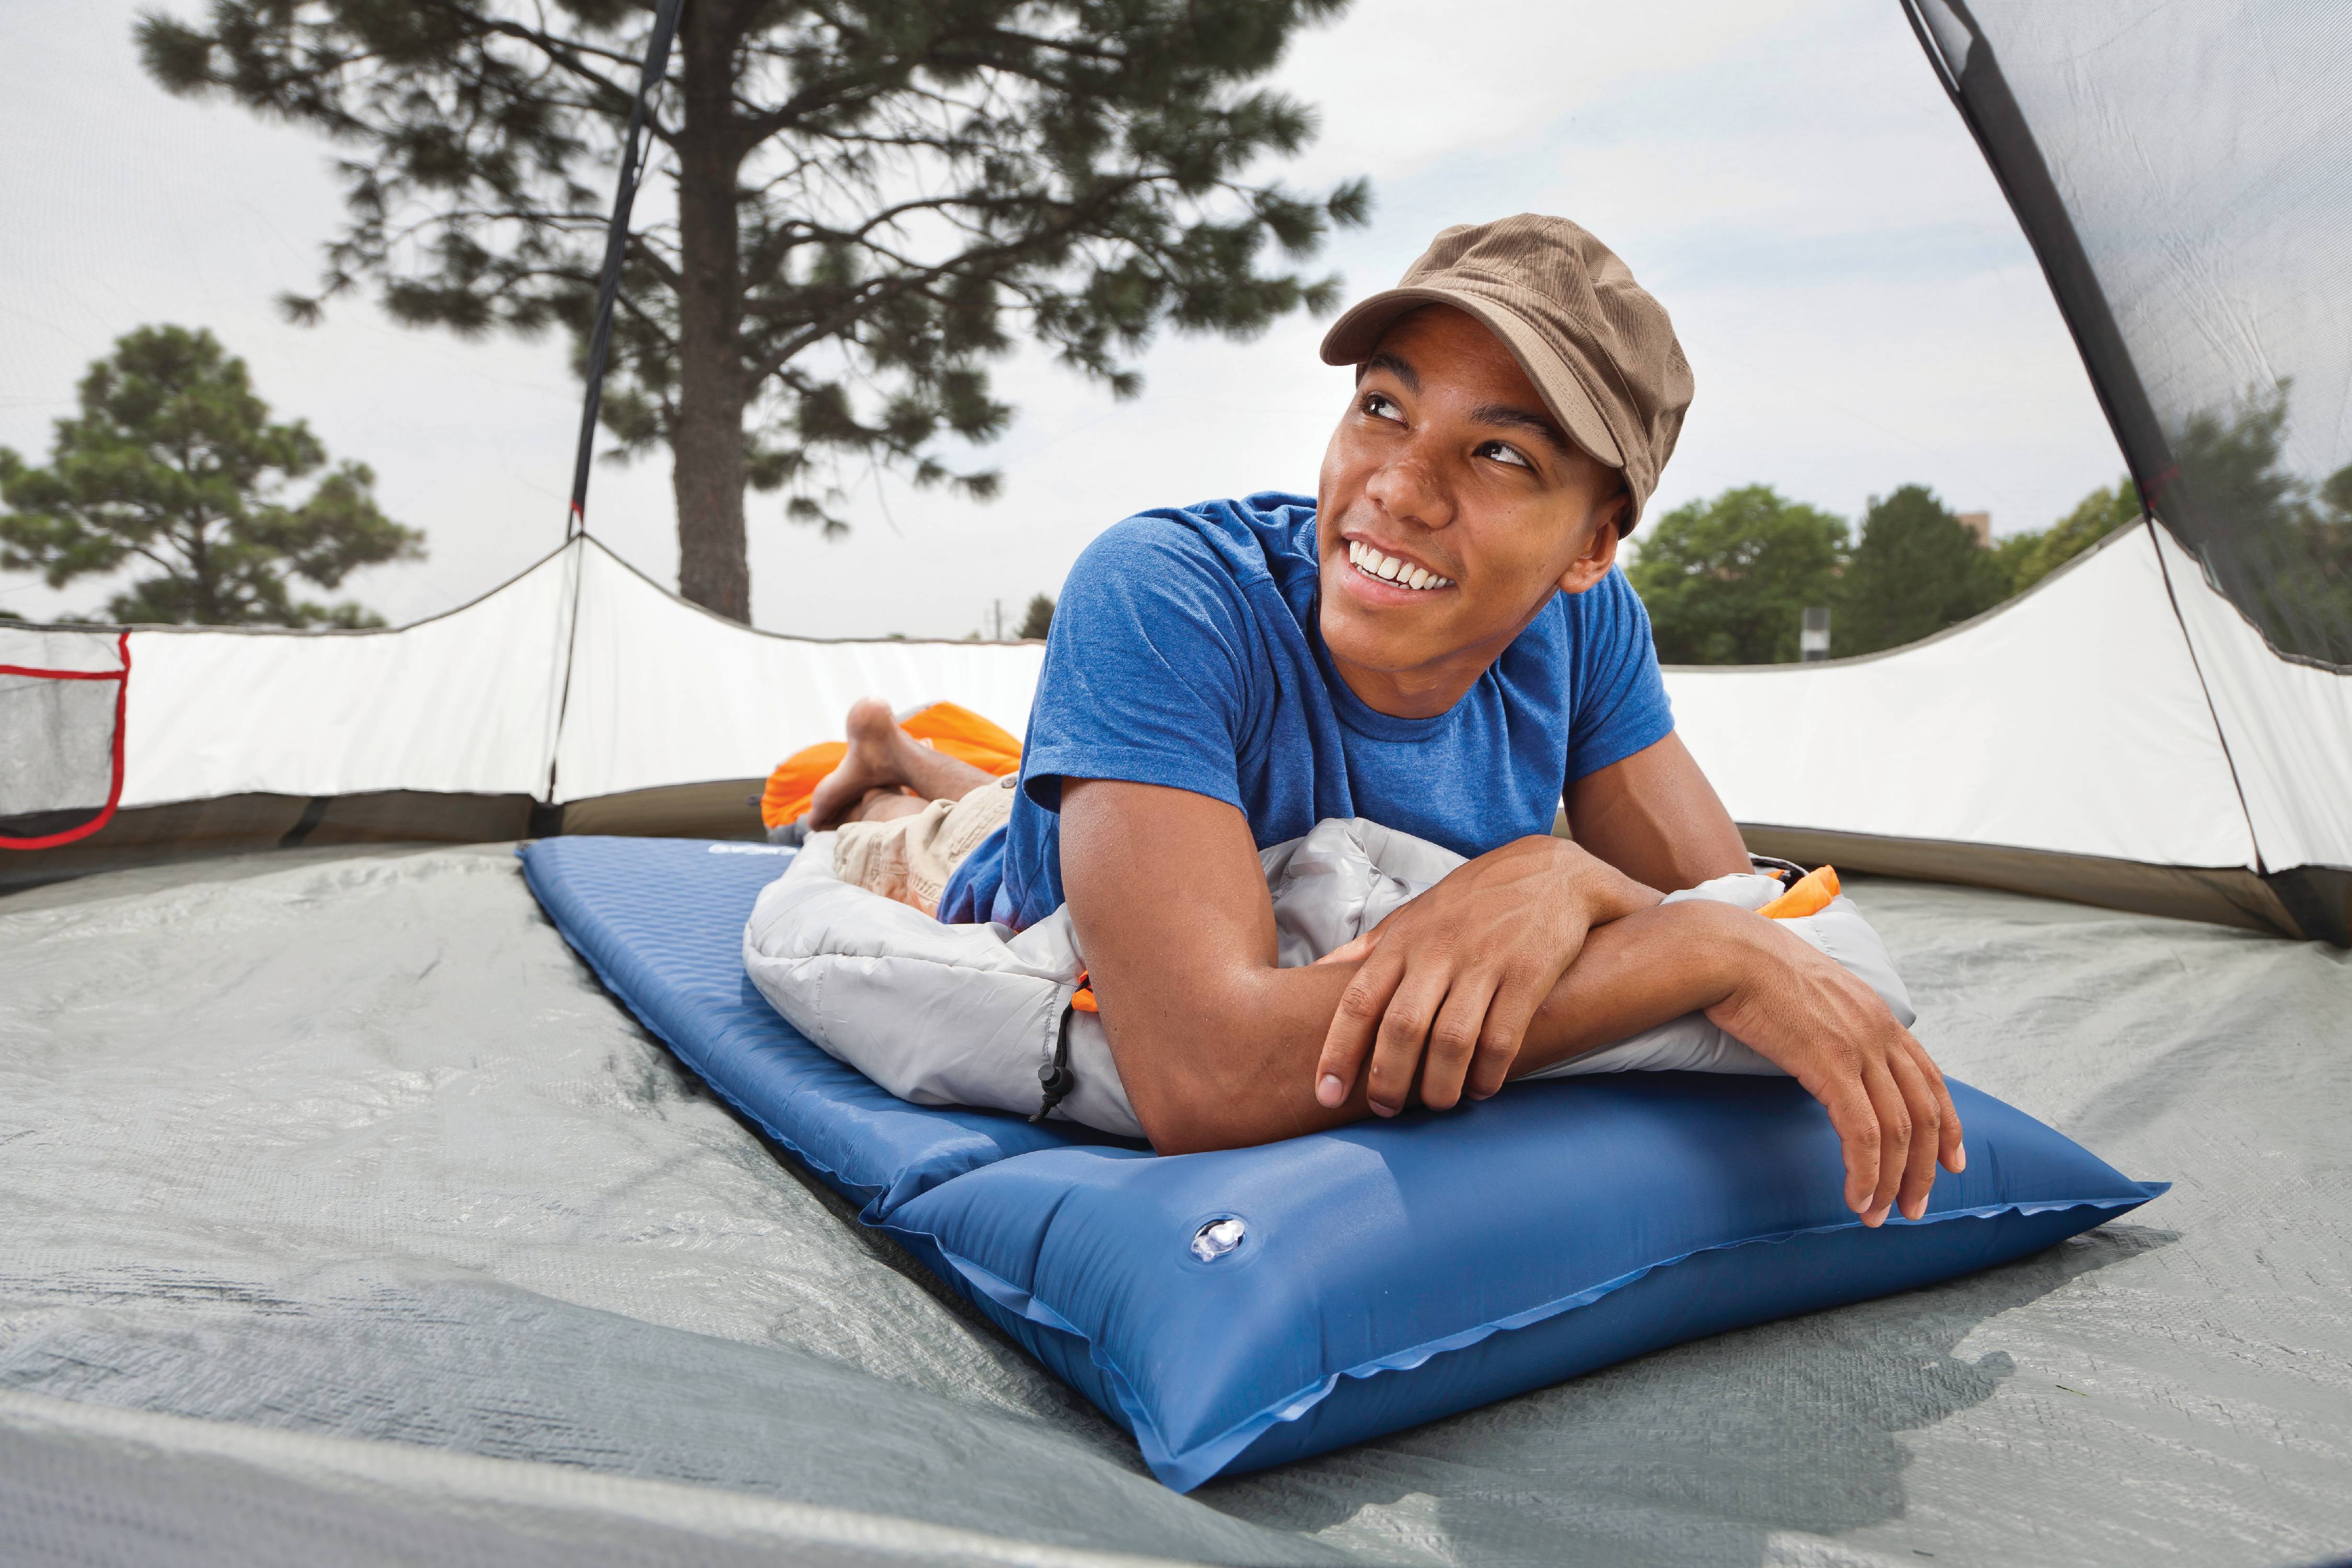 Coleman Self-Inflating Sleeping Camp Pad with Pillow, 76" x 25" - image 5 of 6